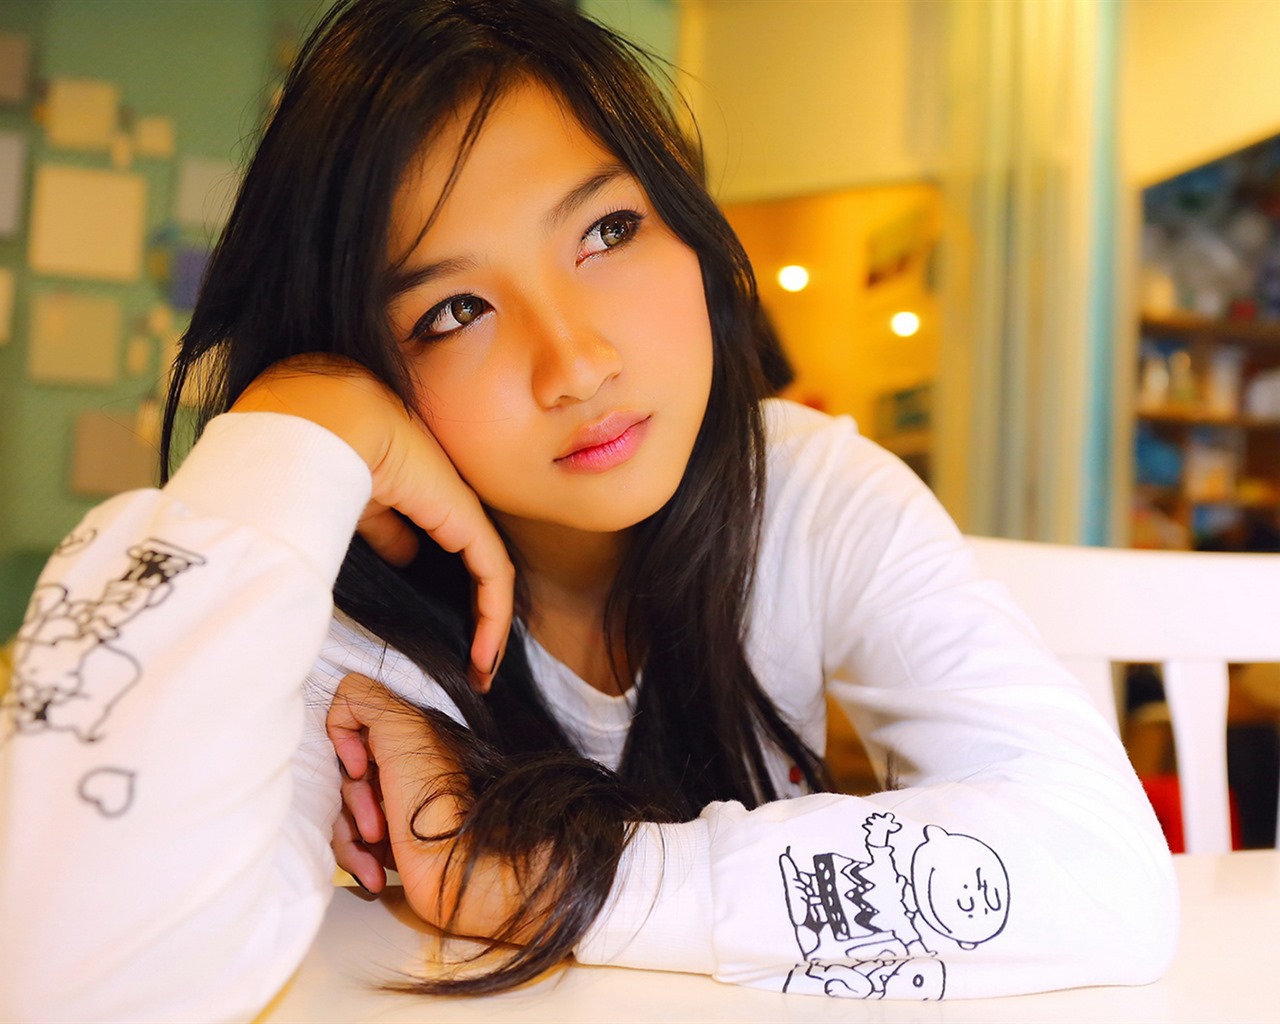 Pure and lovely young Asian girl HD wallpapers collection (2) #9 - 1280x1024